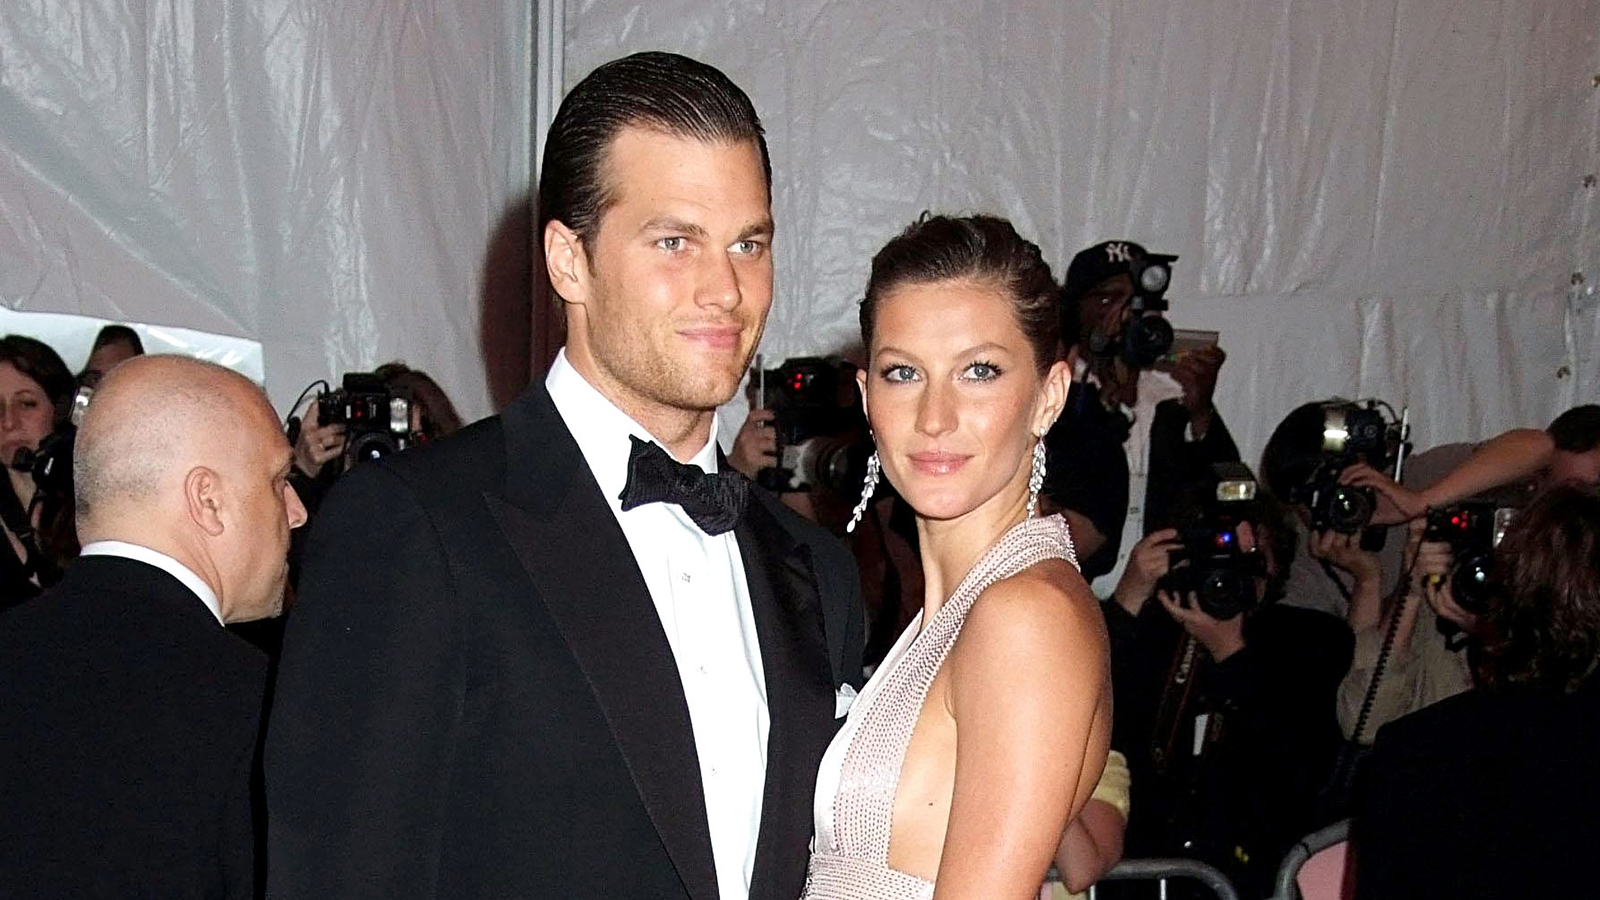 Tom Brady, in a Tom Ford suit, Gisele Bundchen, in a Versace gown, at Superheroes Fashion and Fantasy Gala, Metropolitan Museum of Art Costume Institute, New York, May 05, 2008